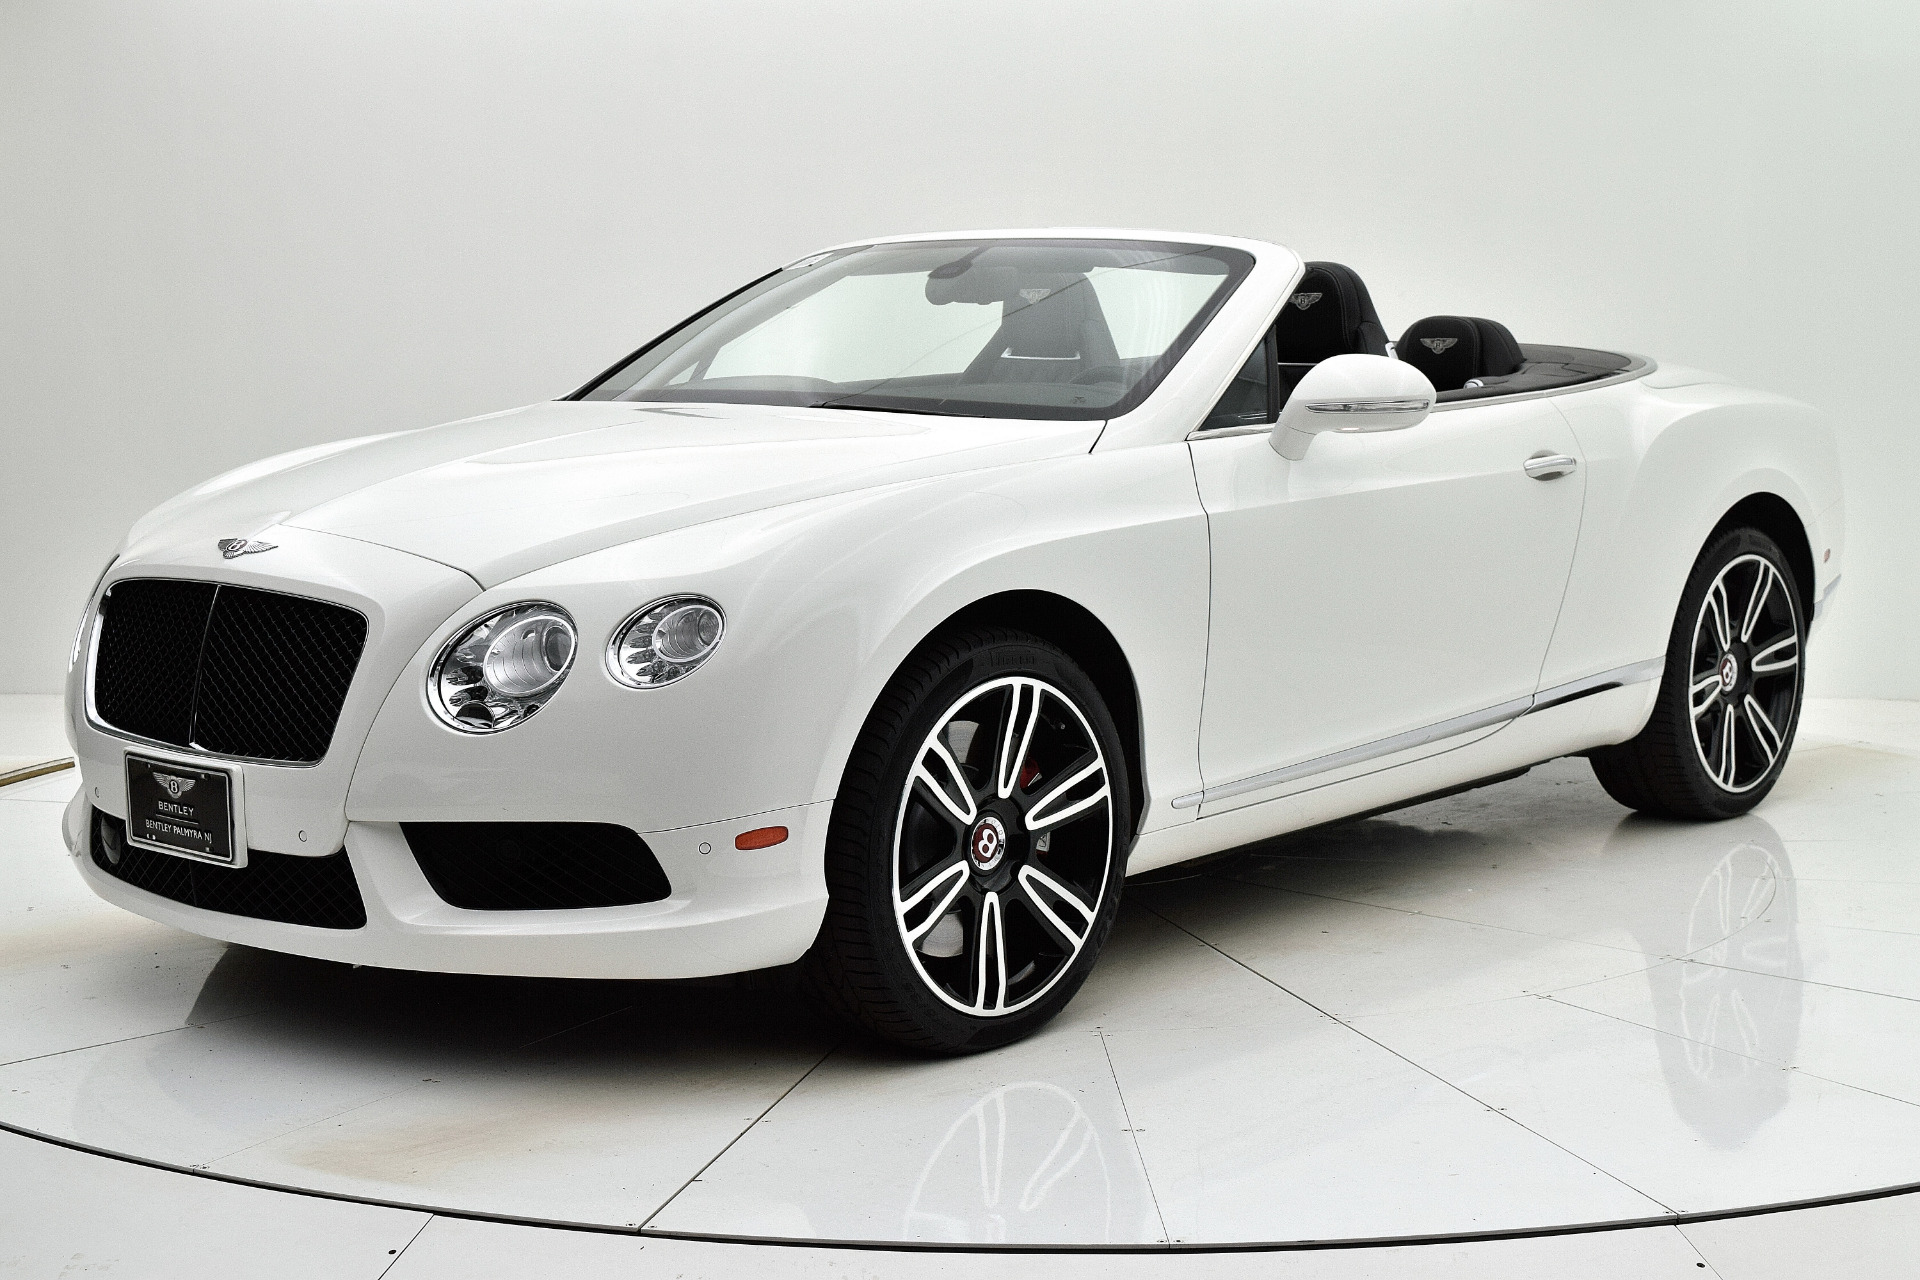 Used 2014 Bentley Continental GT V8 Convertible for sale Sold at Bentley Palmyra N.J. in Palmyra NJ 08065 2